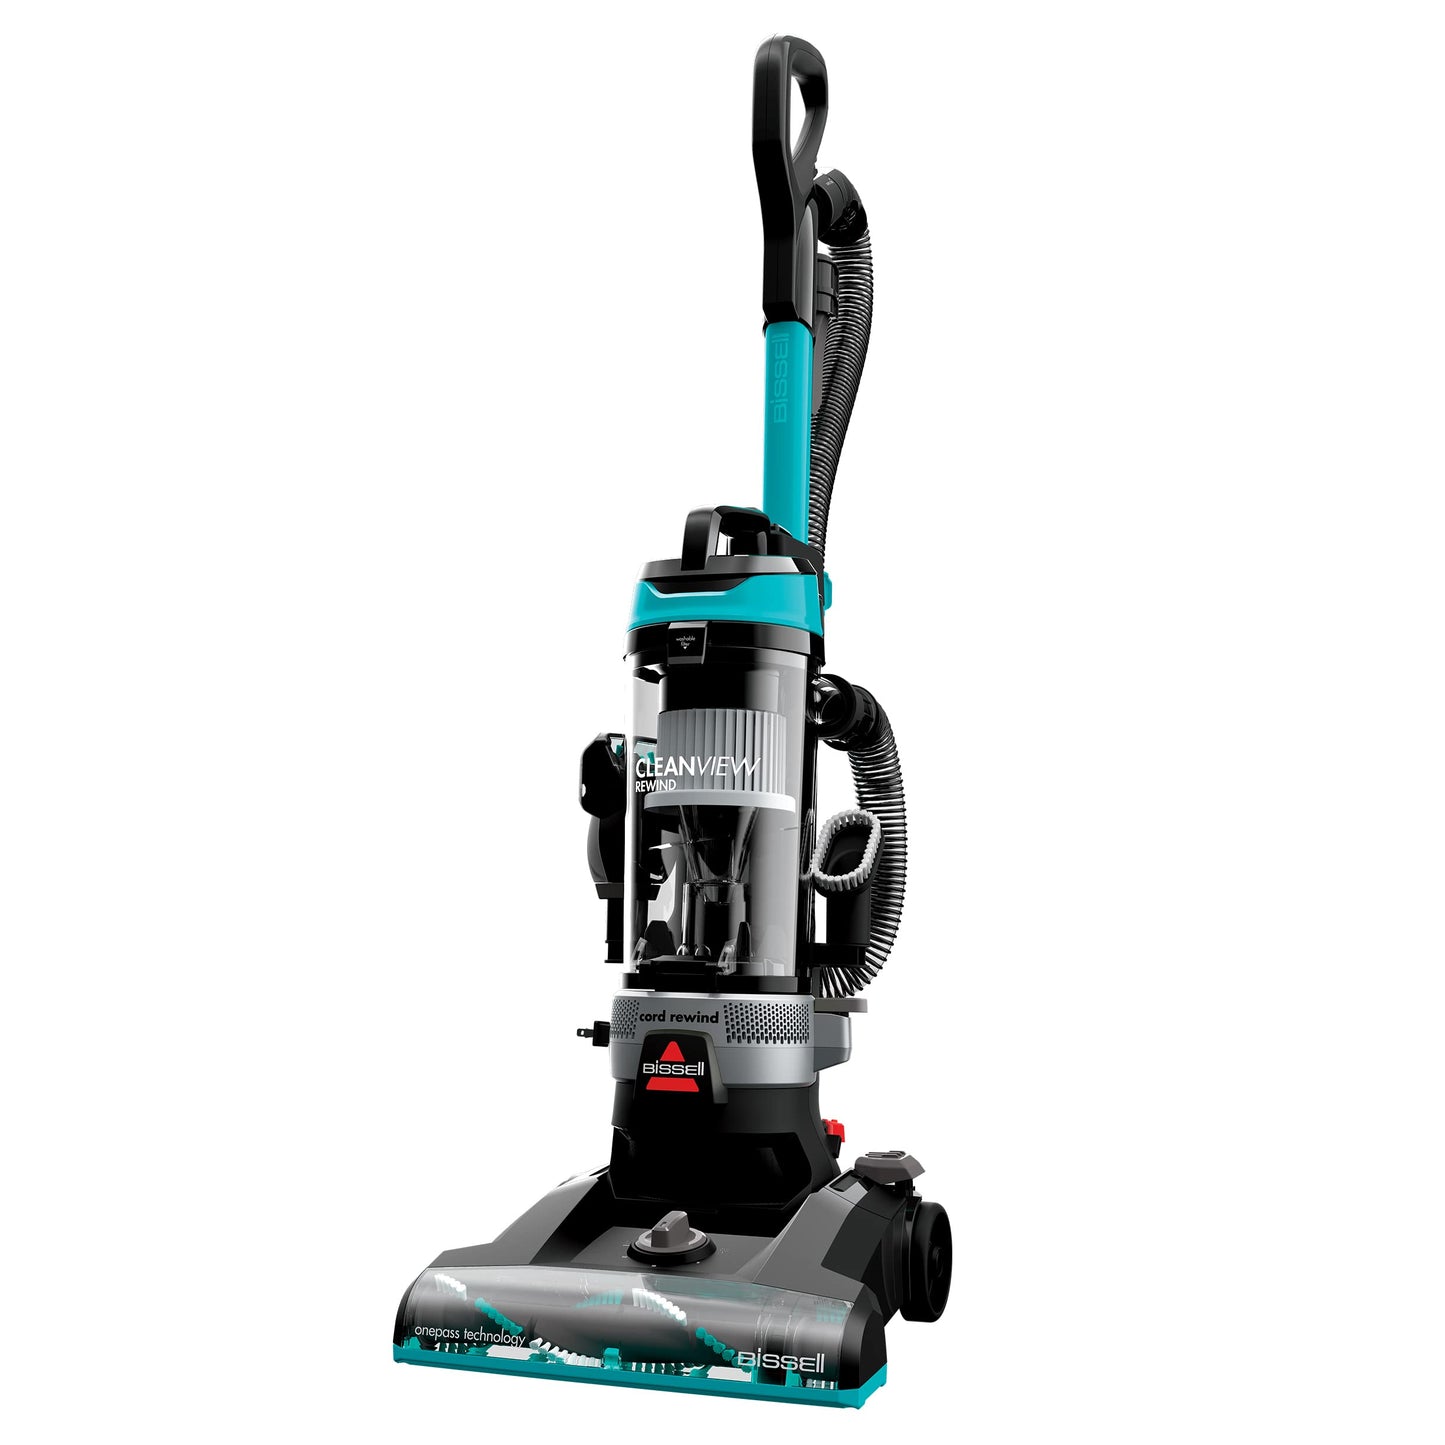 BISSELL CleanView Rewind Upright Bagless Vacuum - 3534, Black/Teal/Gray